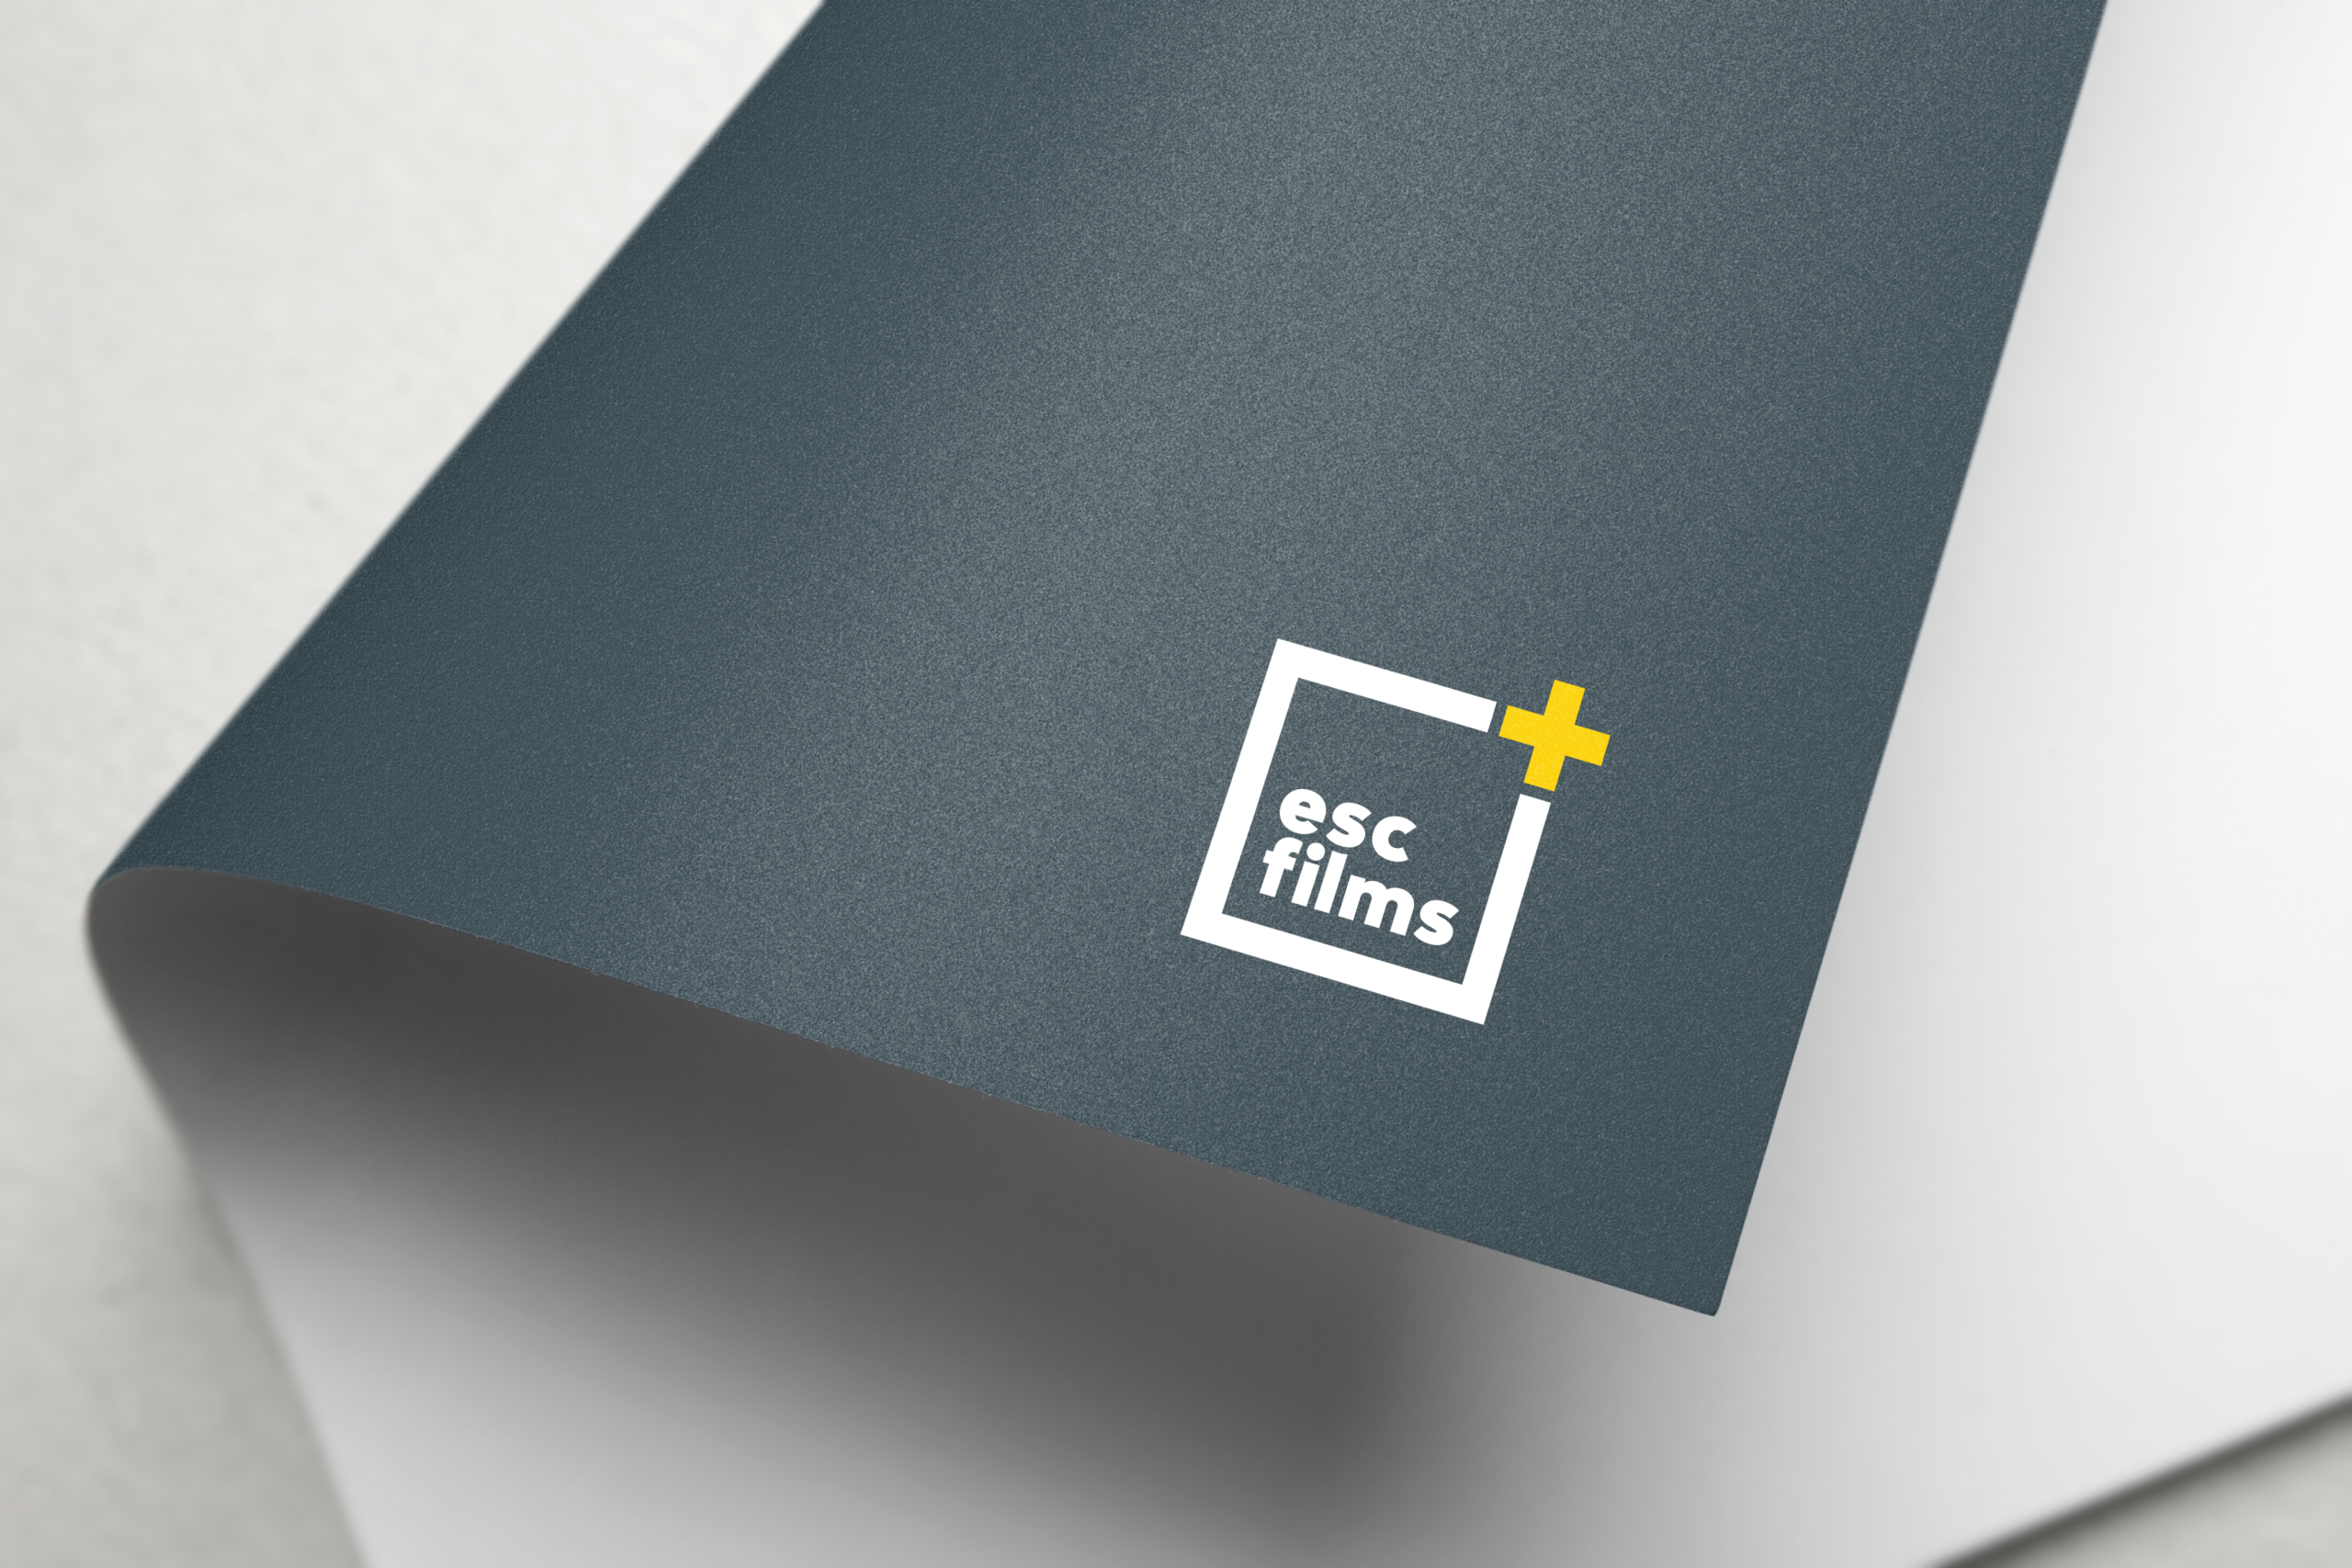 grey rolled up letter with esc films logo in white square with yellow plus sign at top right corner